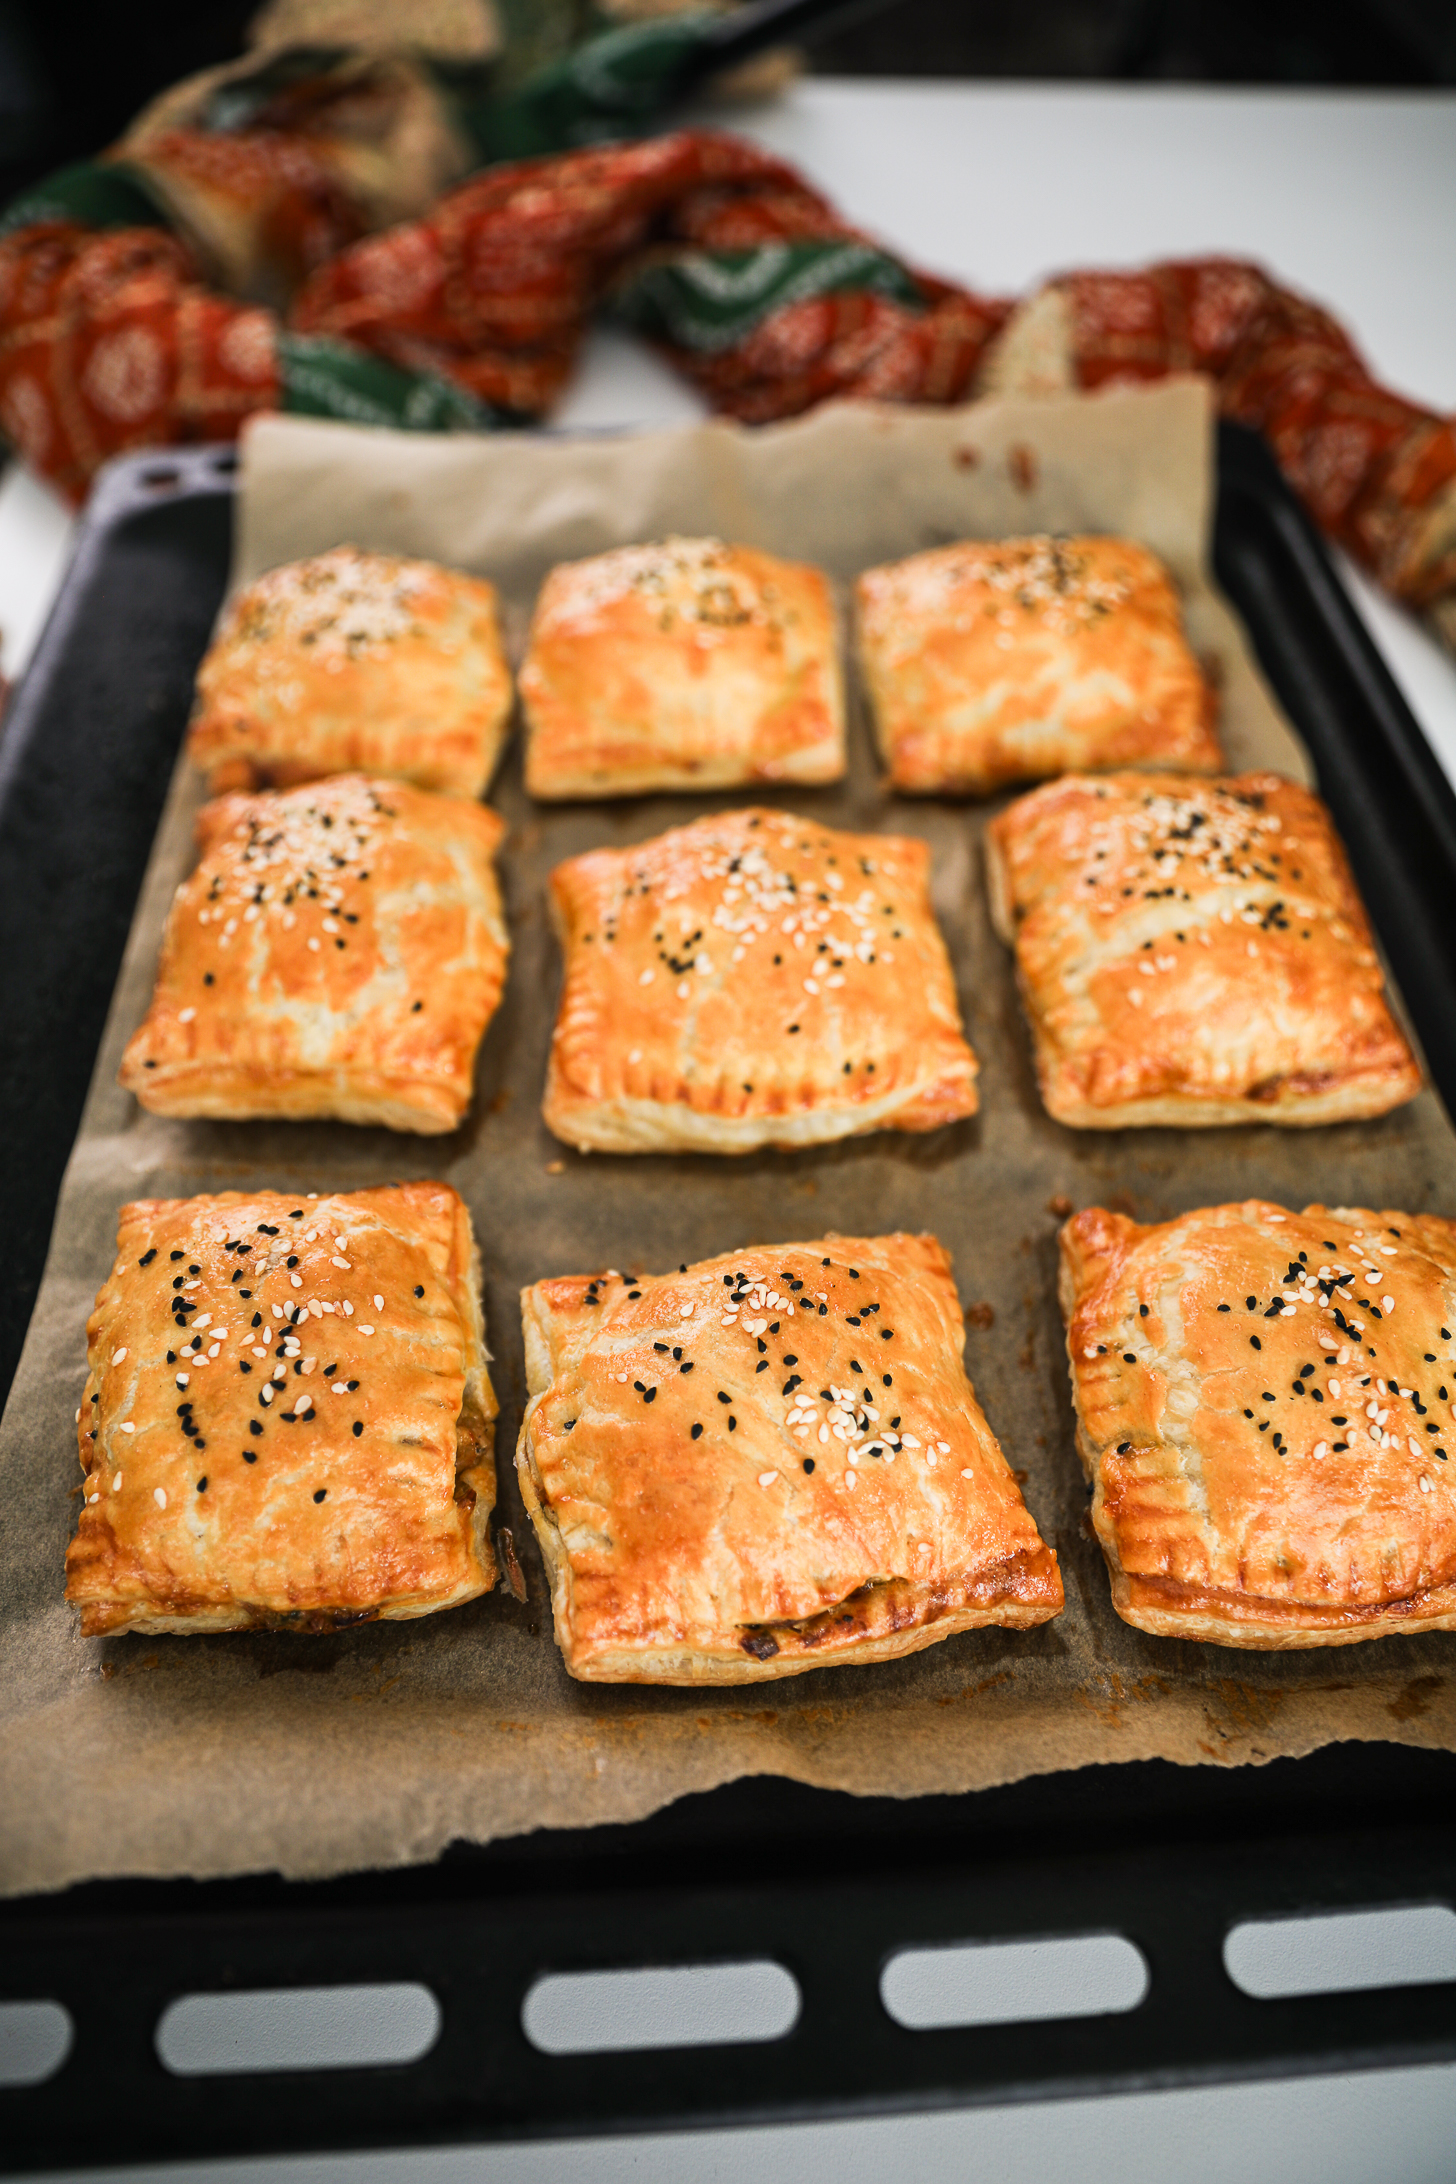 A lined oven tray of baked golden puff pastries topped with seeds.